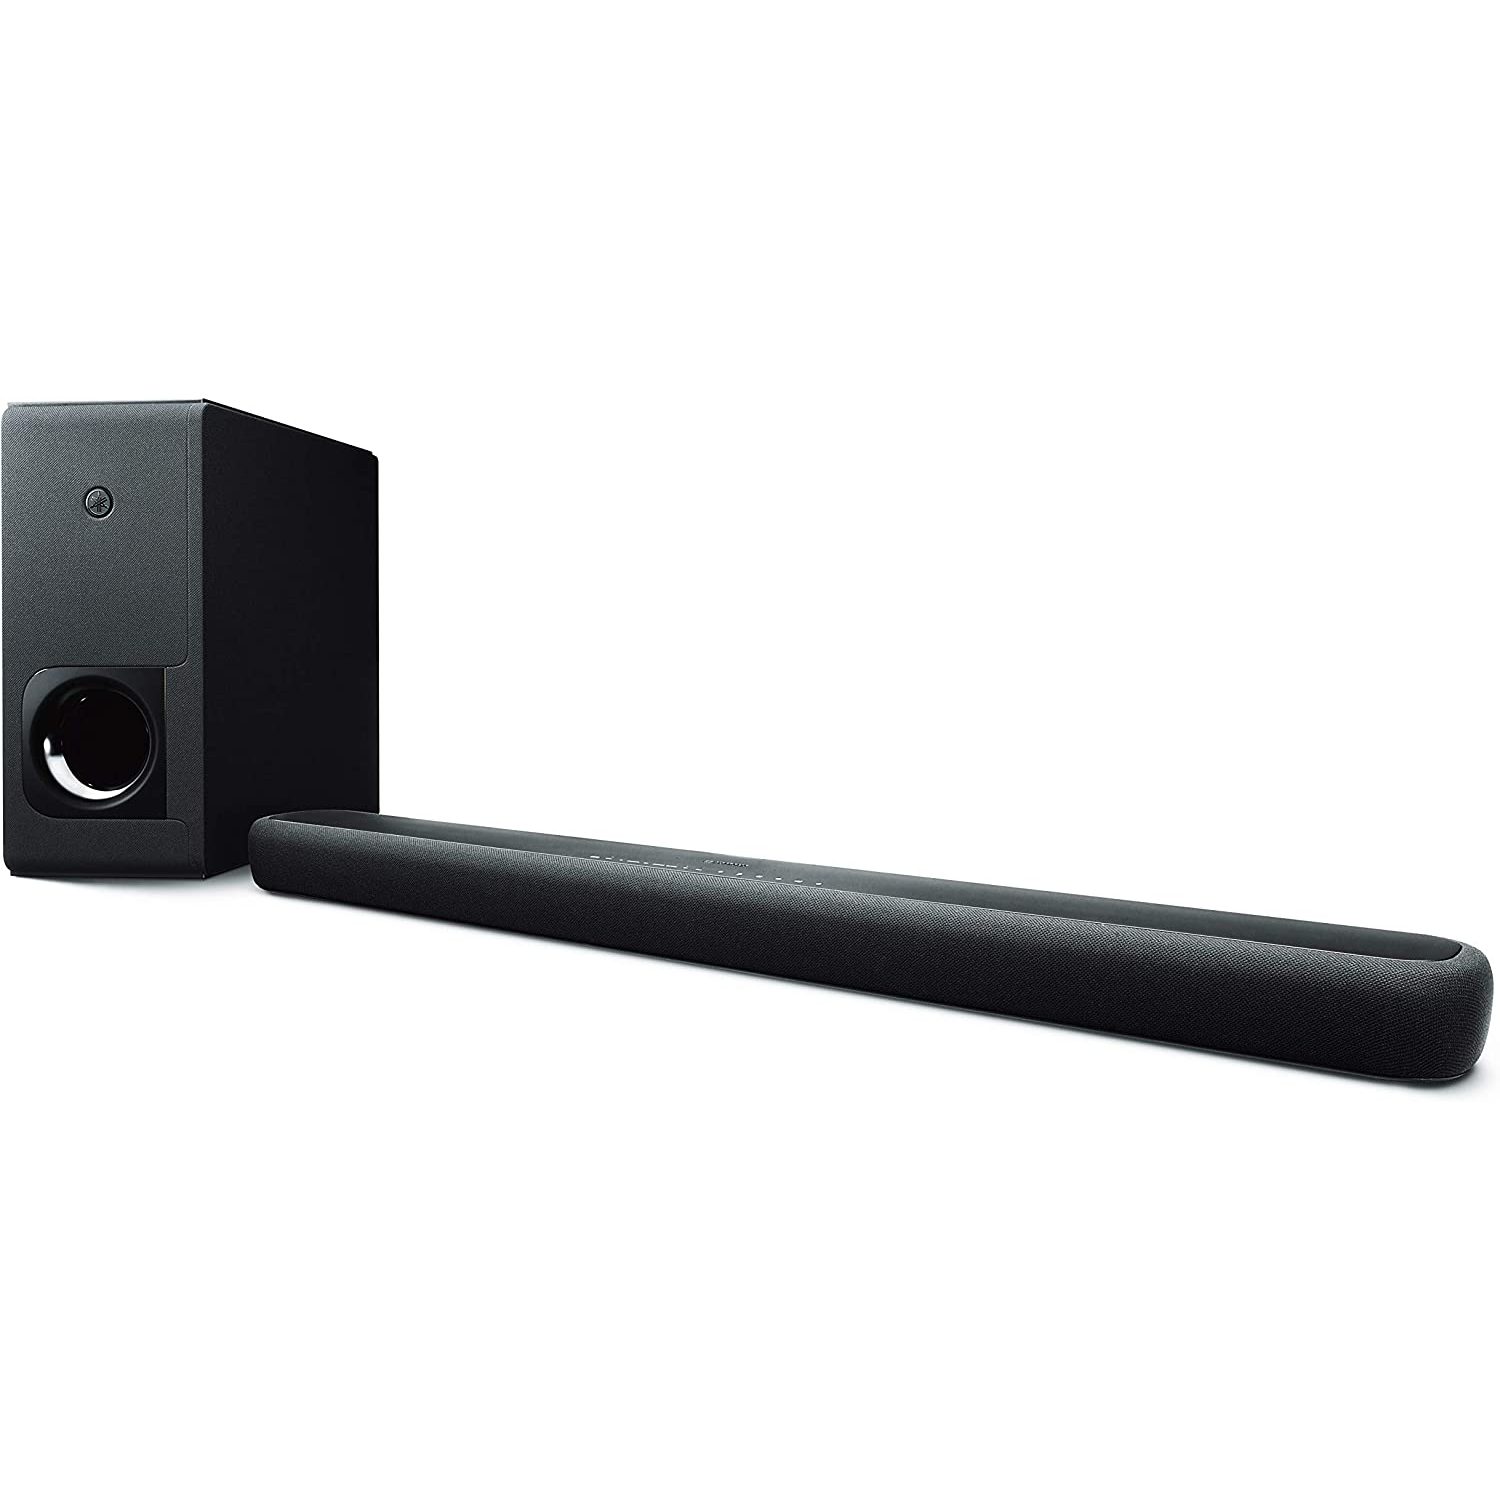 YAMAHA ATS-2090 Sound Bar with Wireless Subwoofer and Alexa Built-in